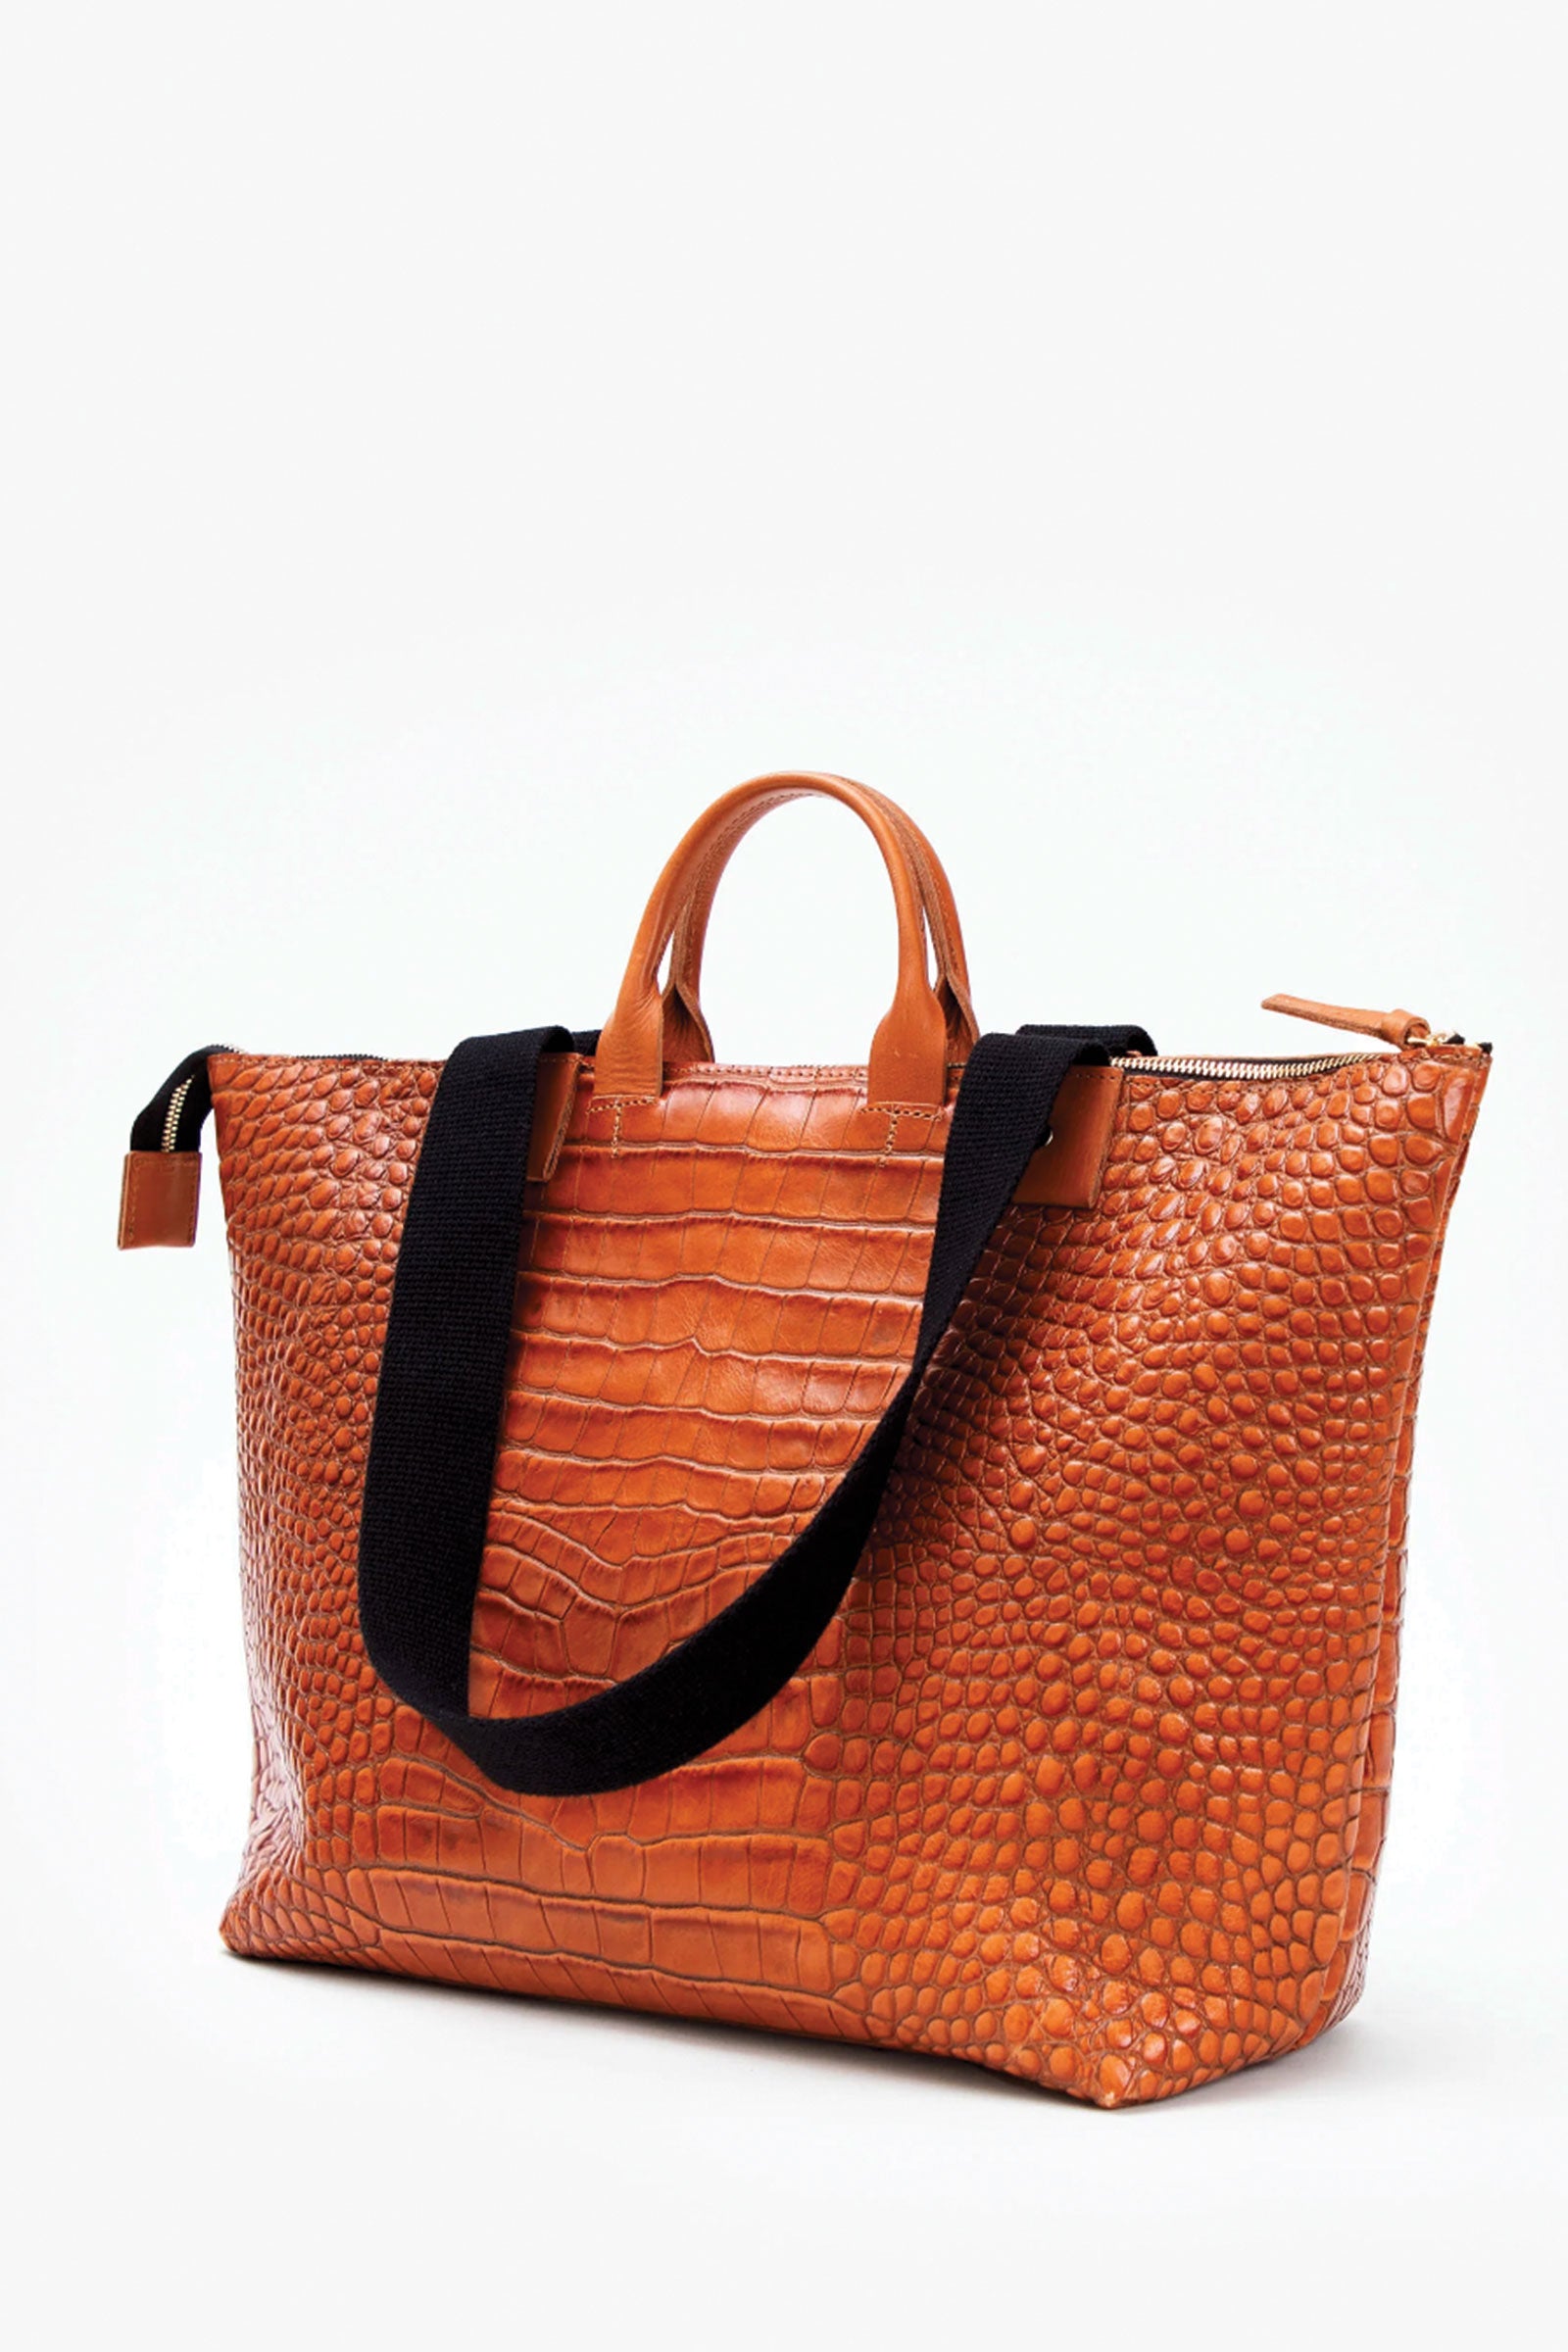 Clare Vivier Suede Tote Bags for Women